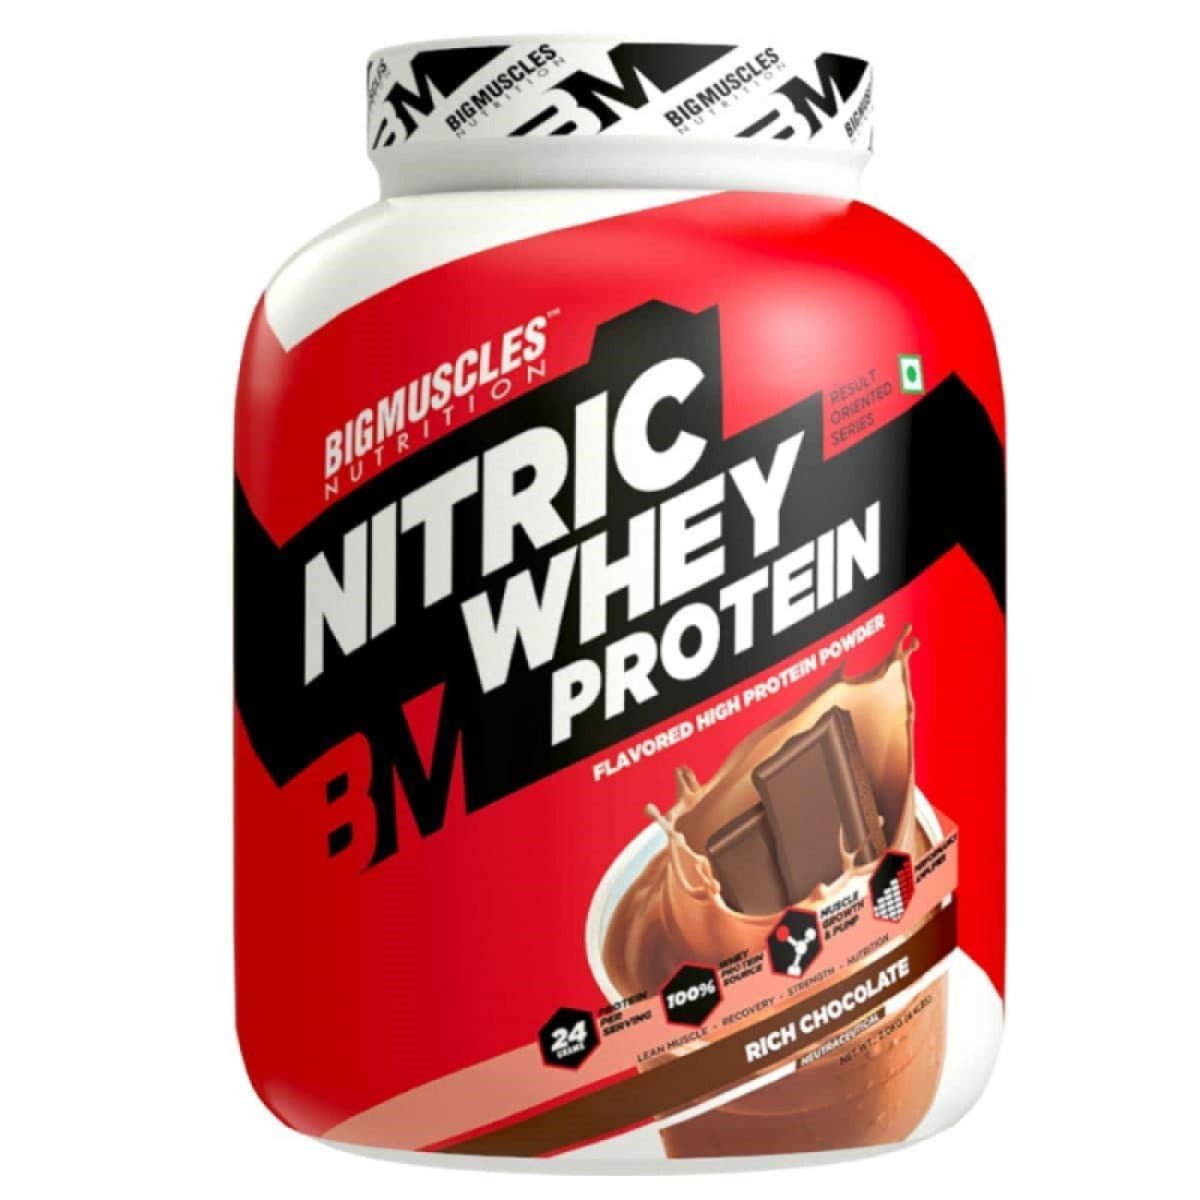 Bigmuscles Nutrition Nitric Whey